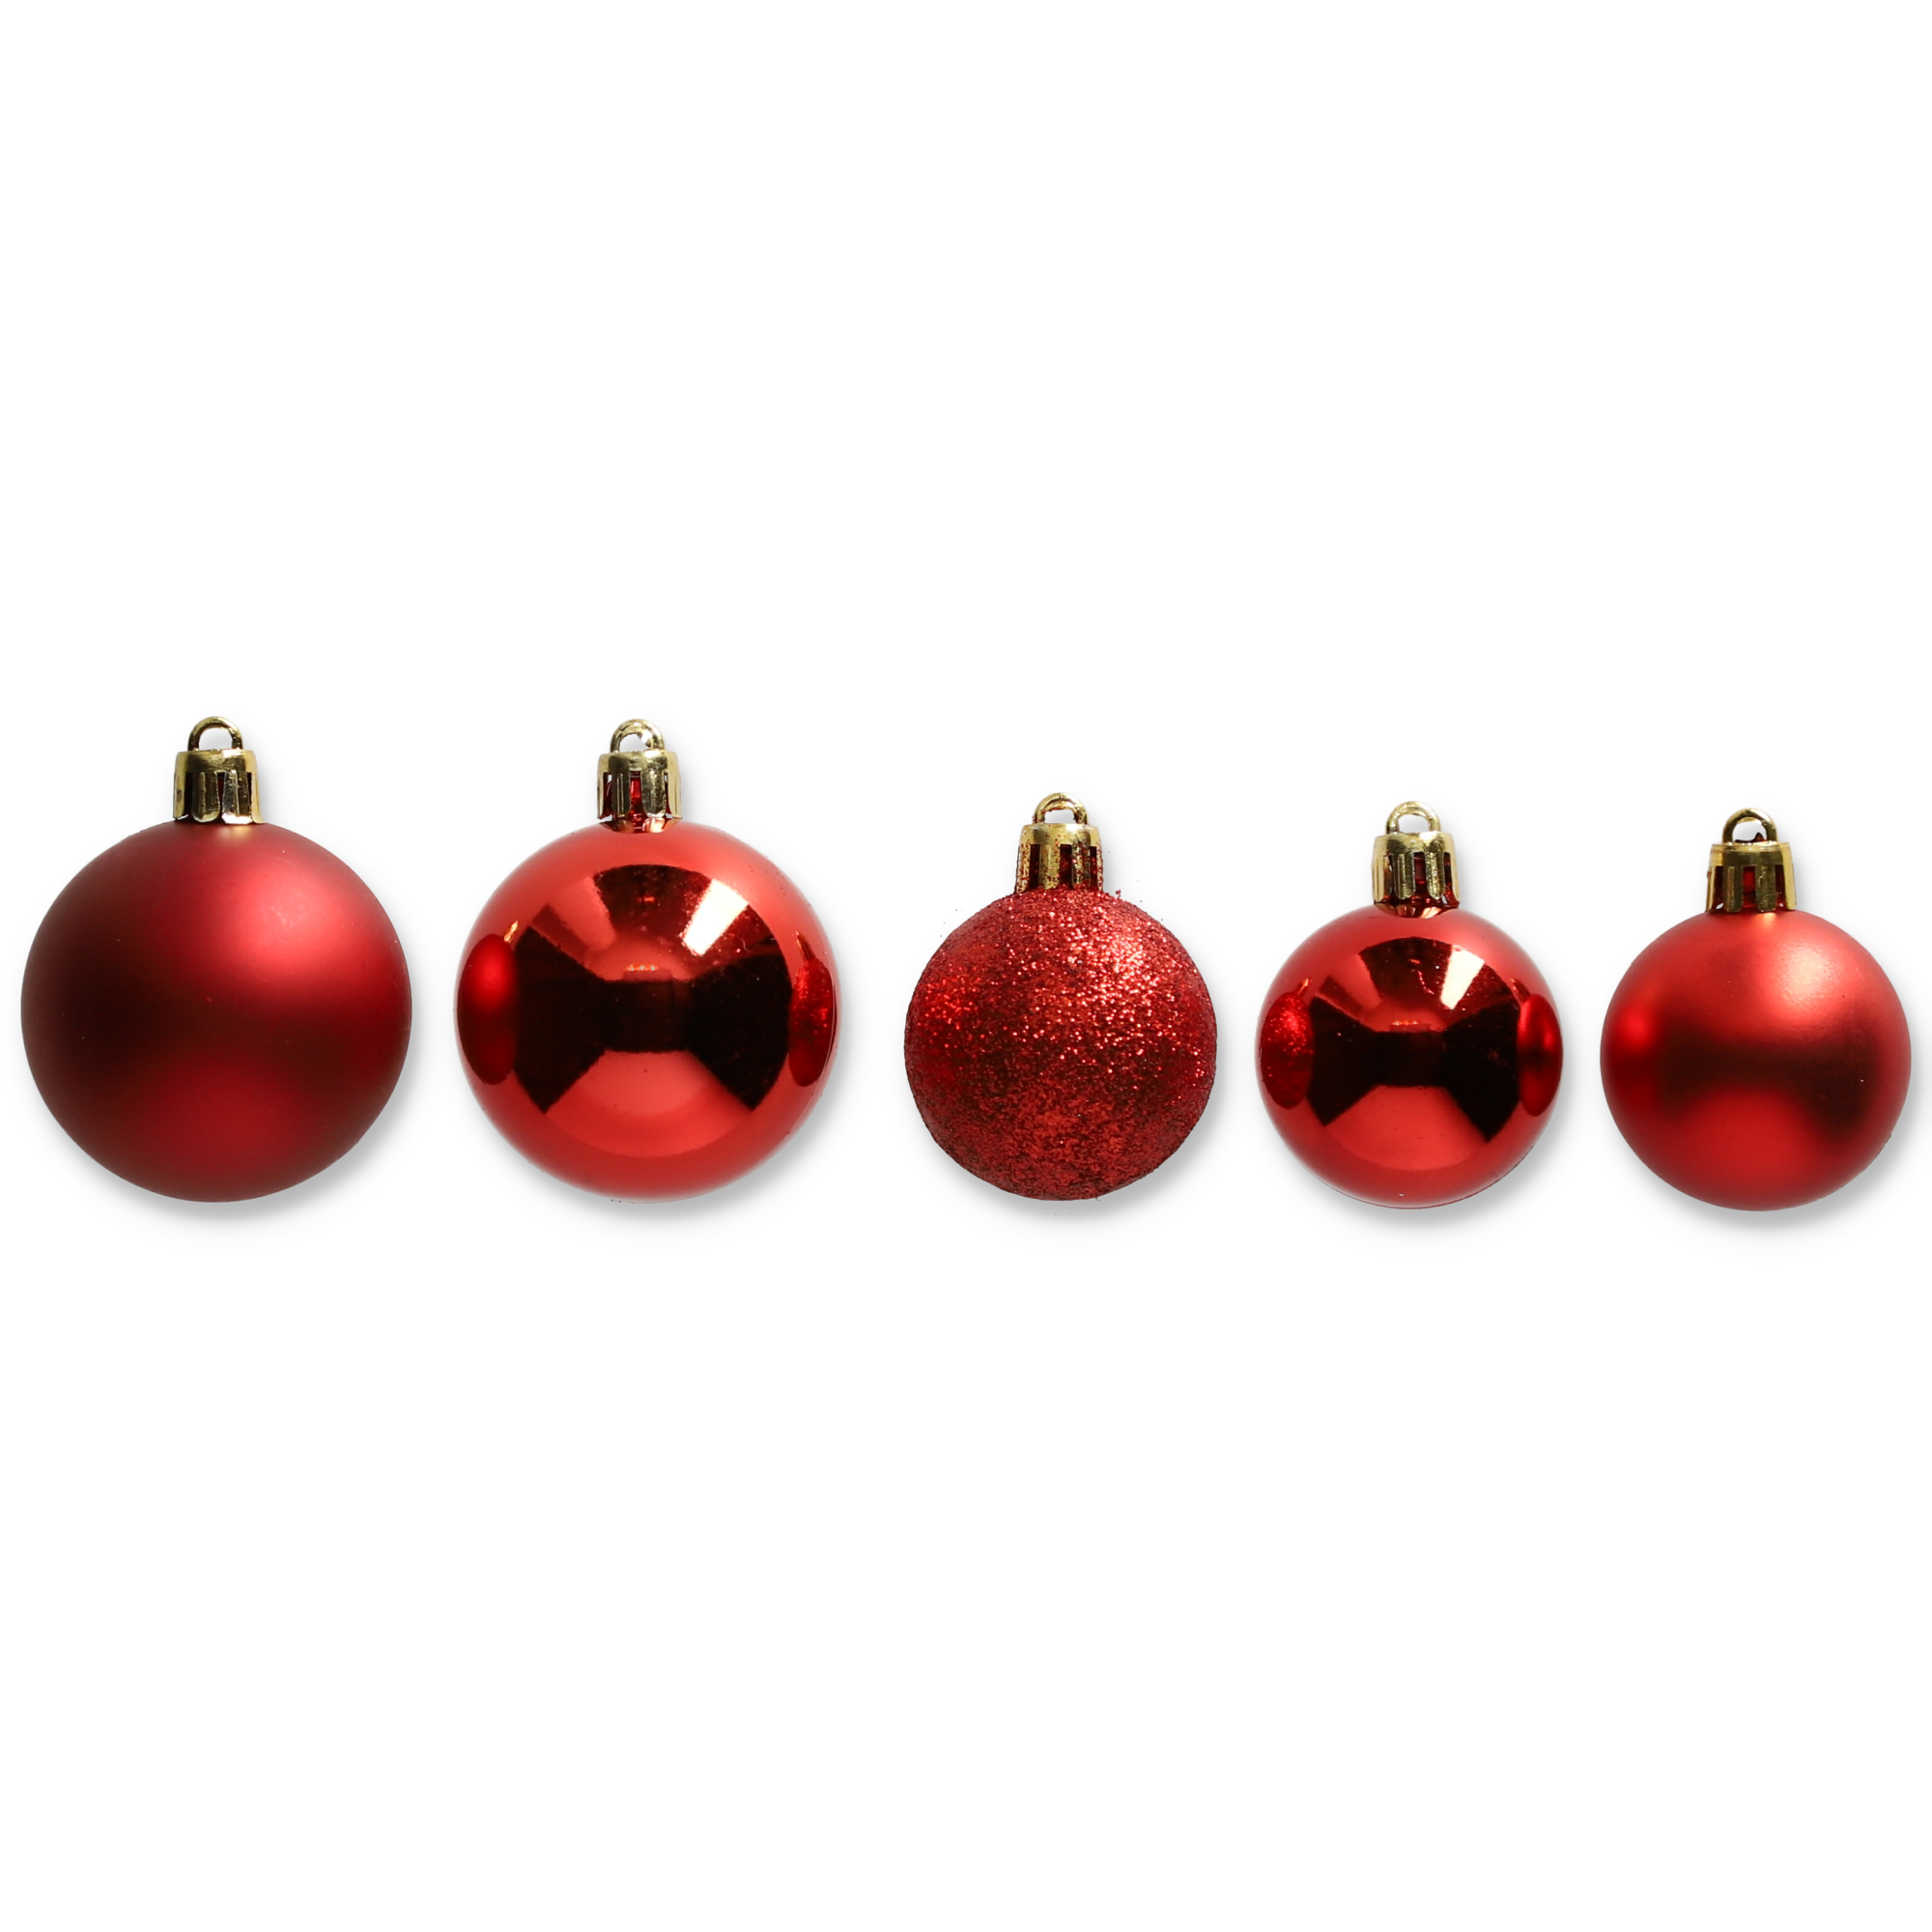 Christbaumschmuck-Set rot, 45-teilig + product picture